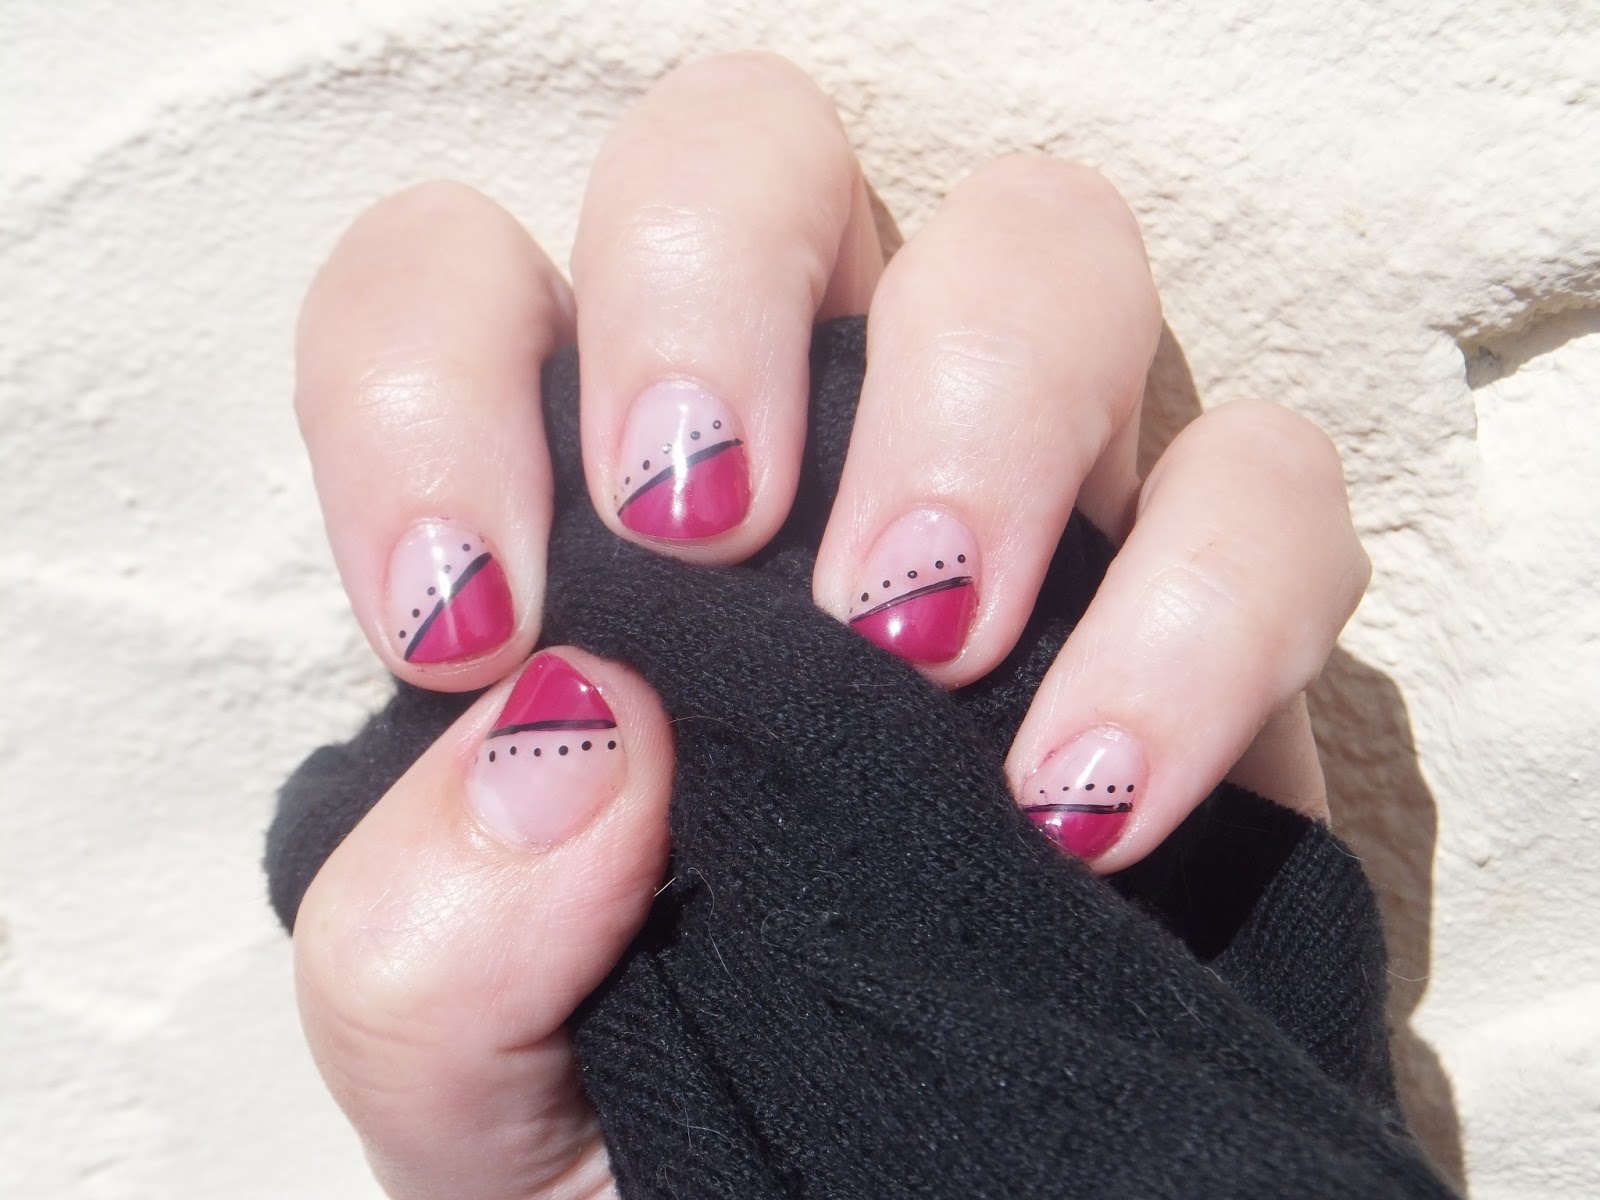 1. Nail Art & Beauty by Sarah - wide 7